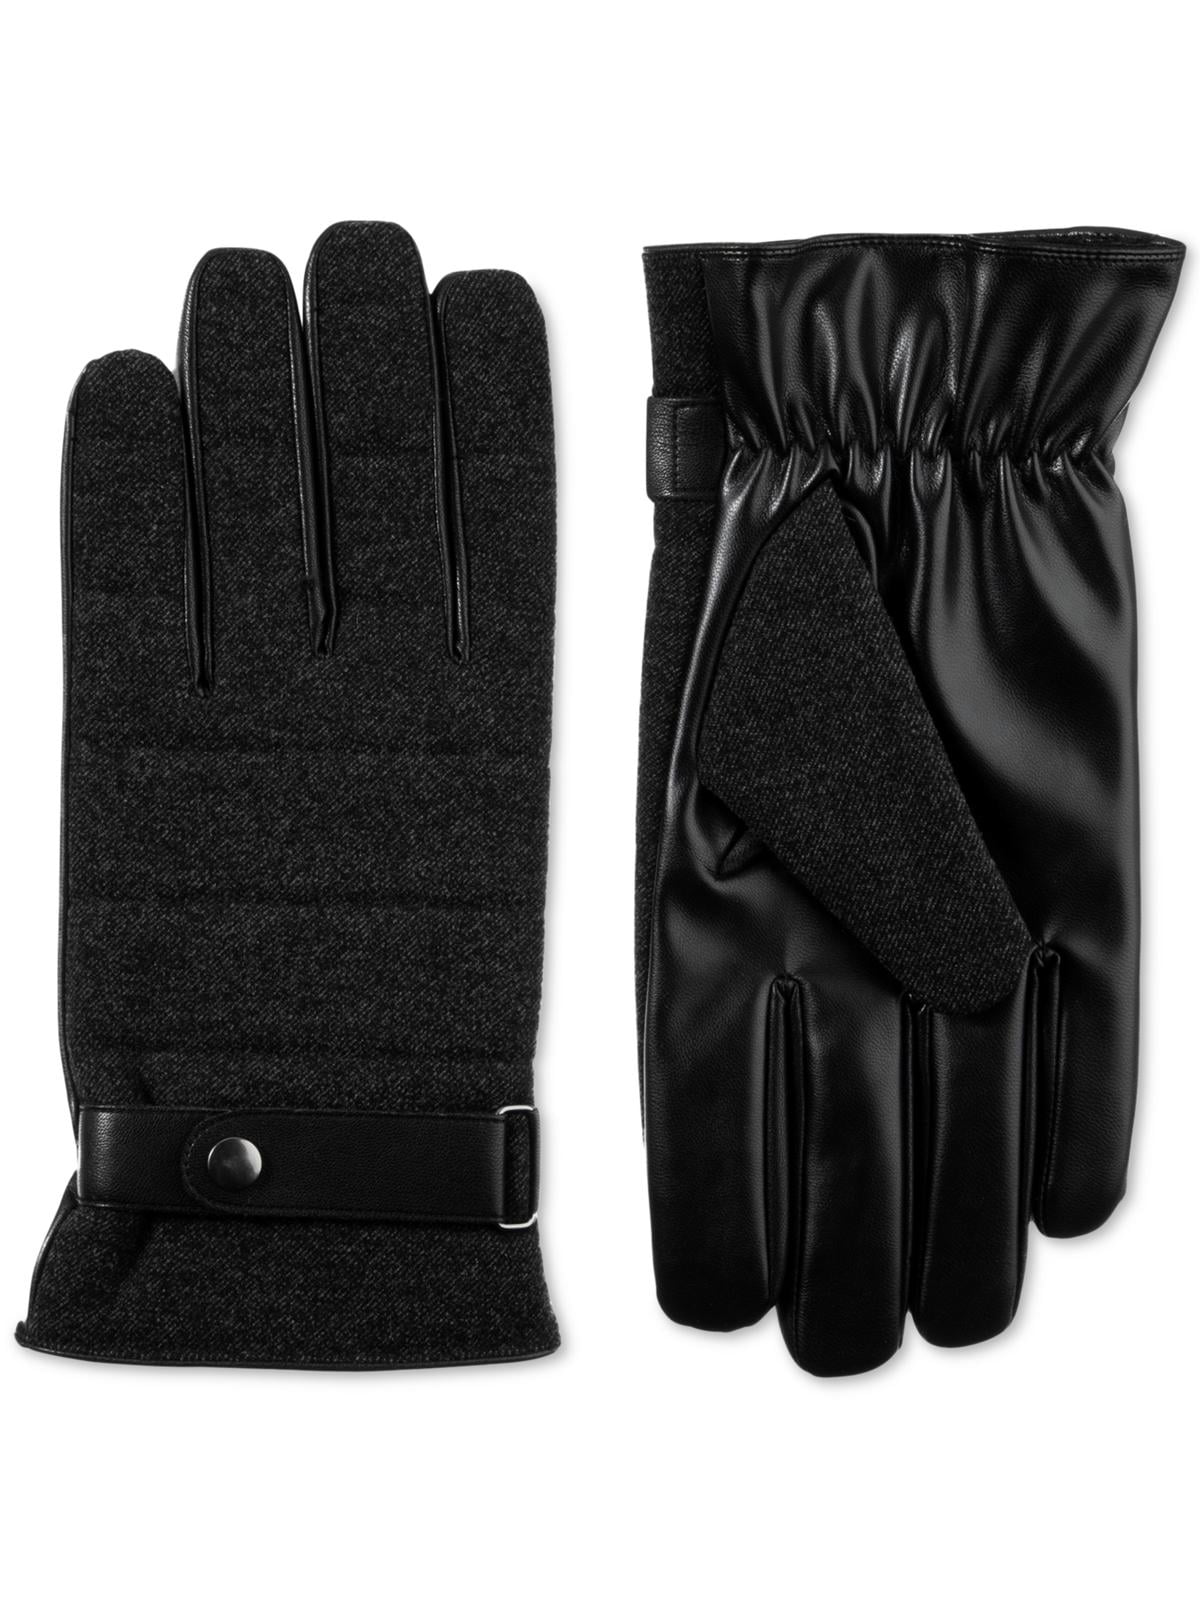 Size 9 Now £6.99 Winter leather PU Touch Screen Gloves Thermal SALE  £9.99 